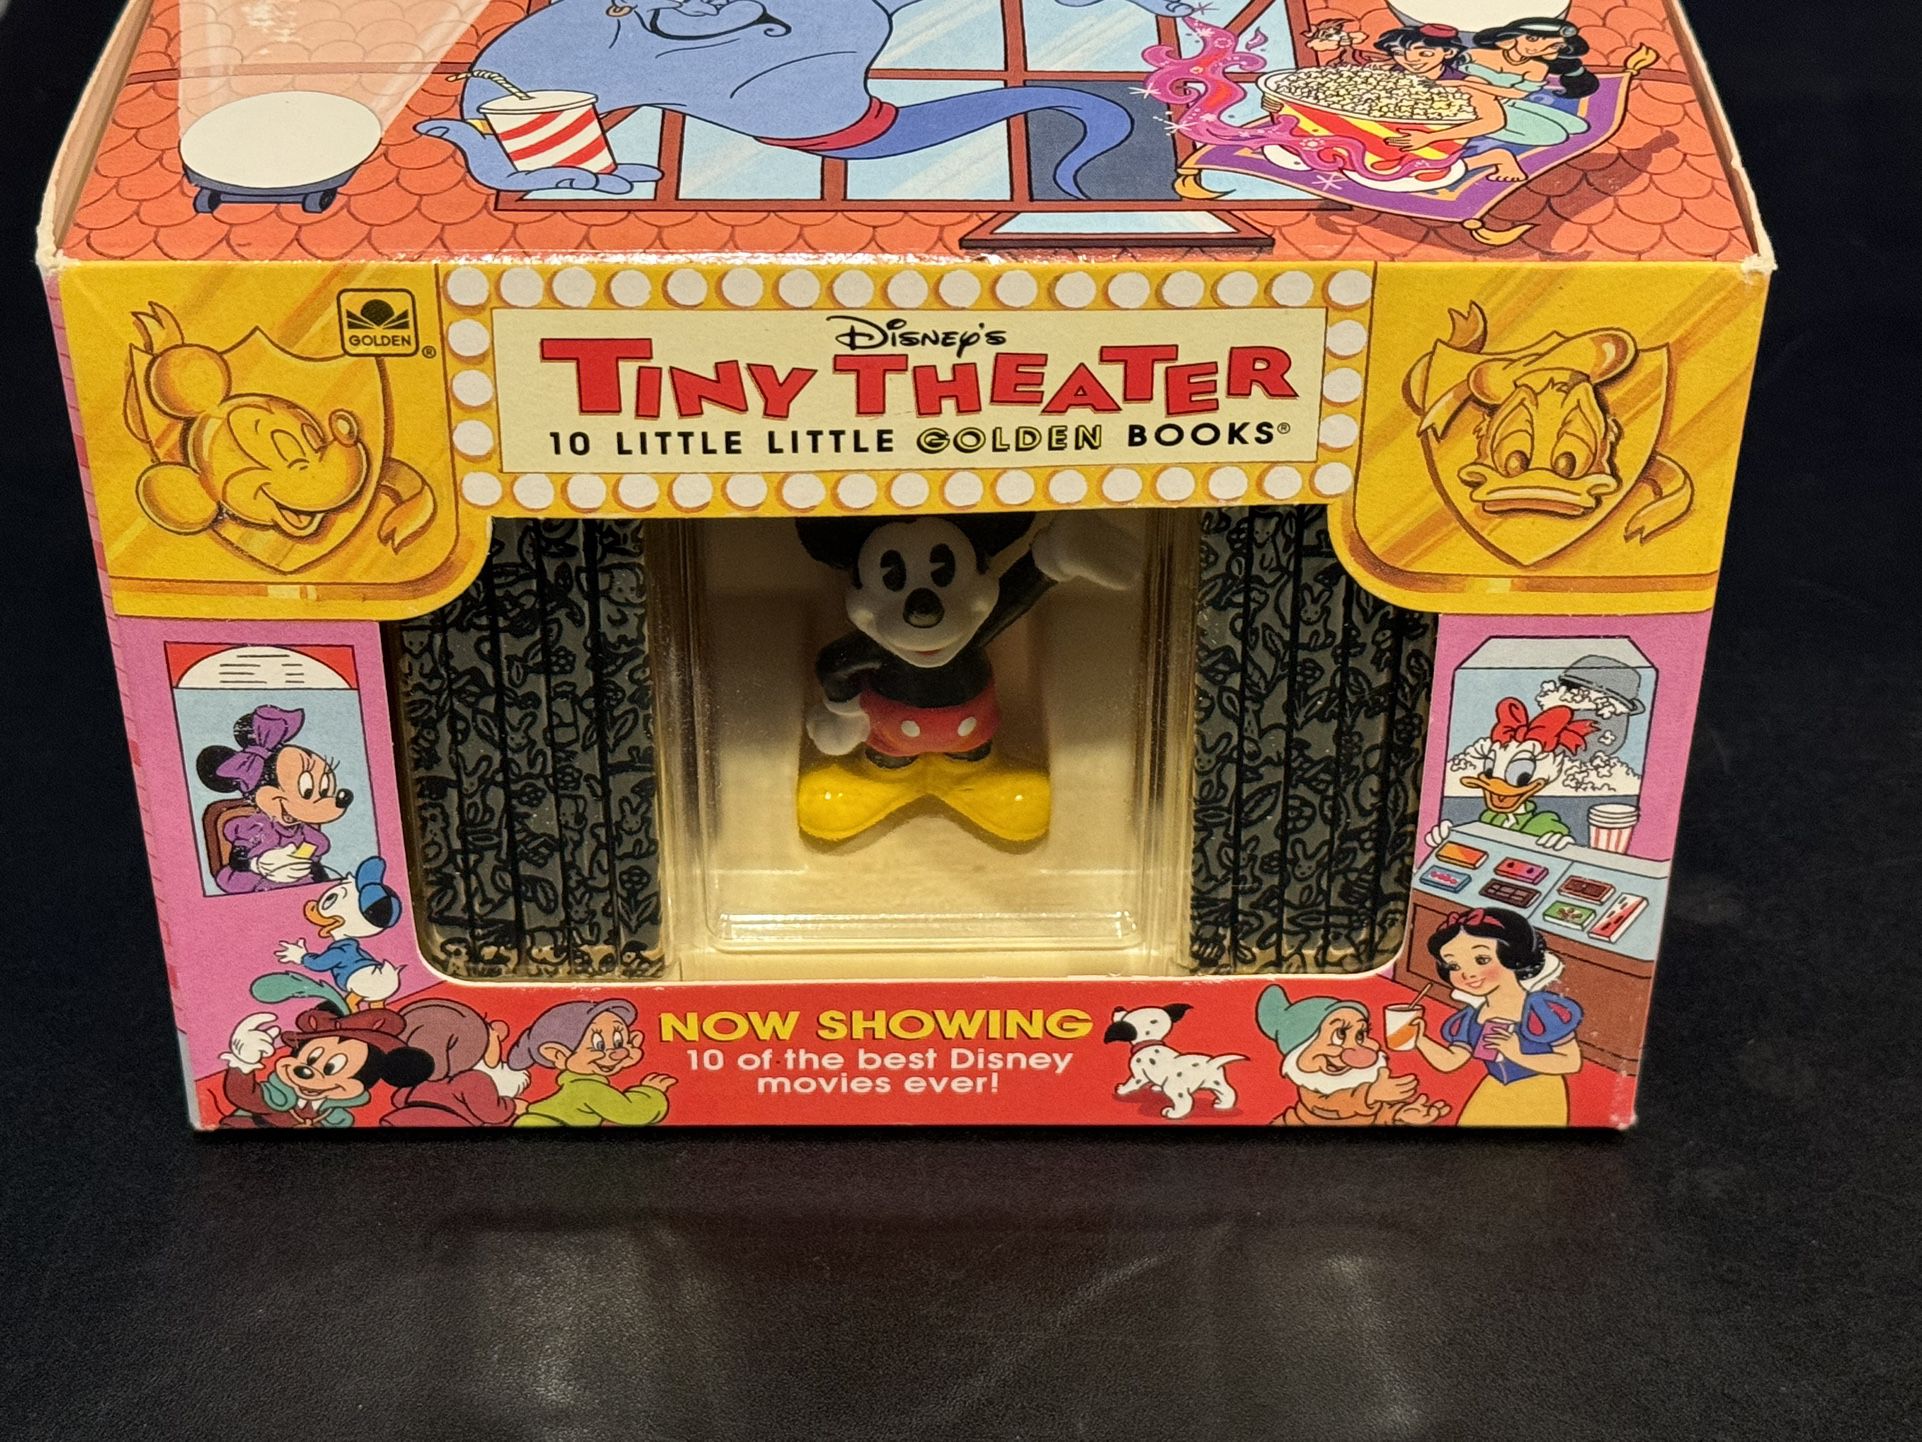 The product is a 1993 Disney's Tiny Theatre set that includes 10 Little Golden Books and a Mickey Mouse figure. The figure is part of the Mickey & Fri